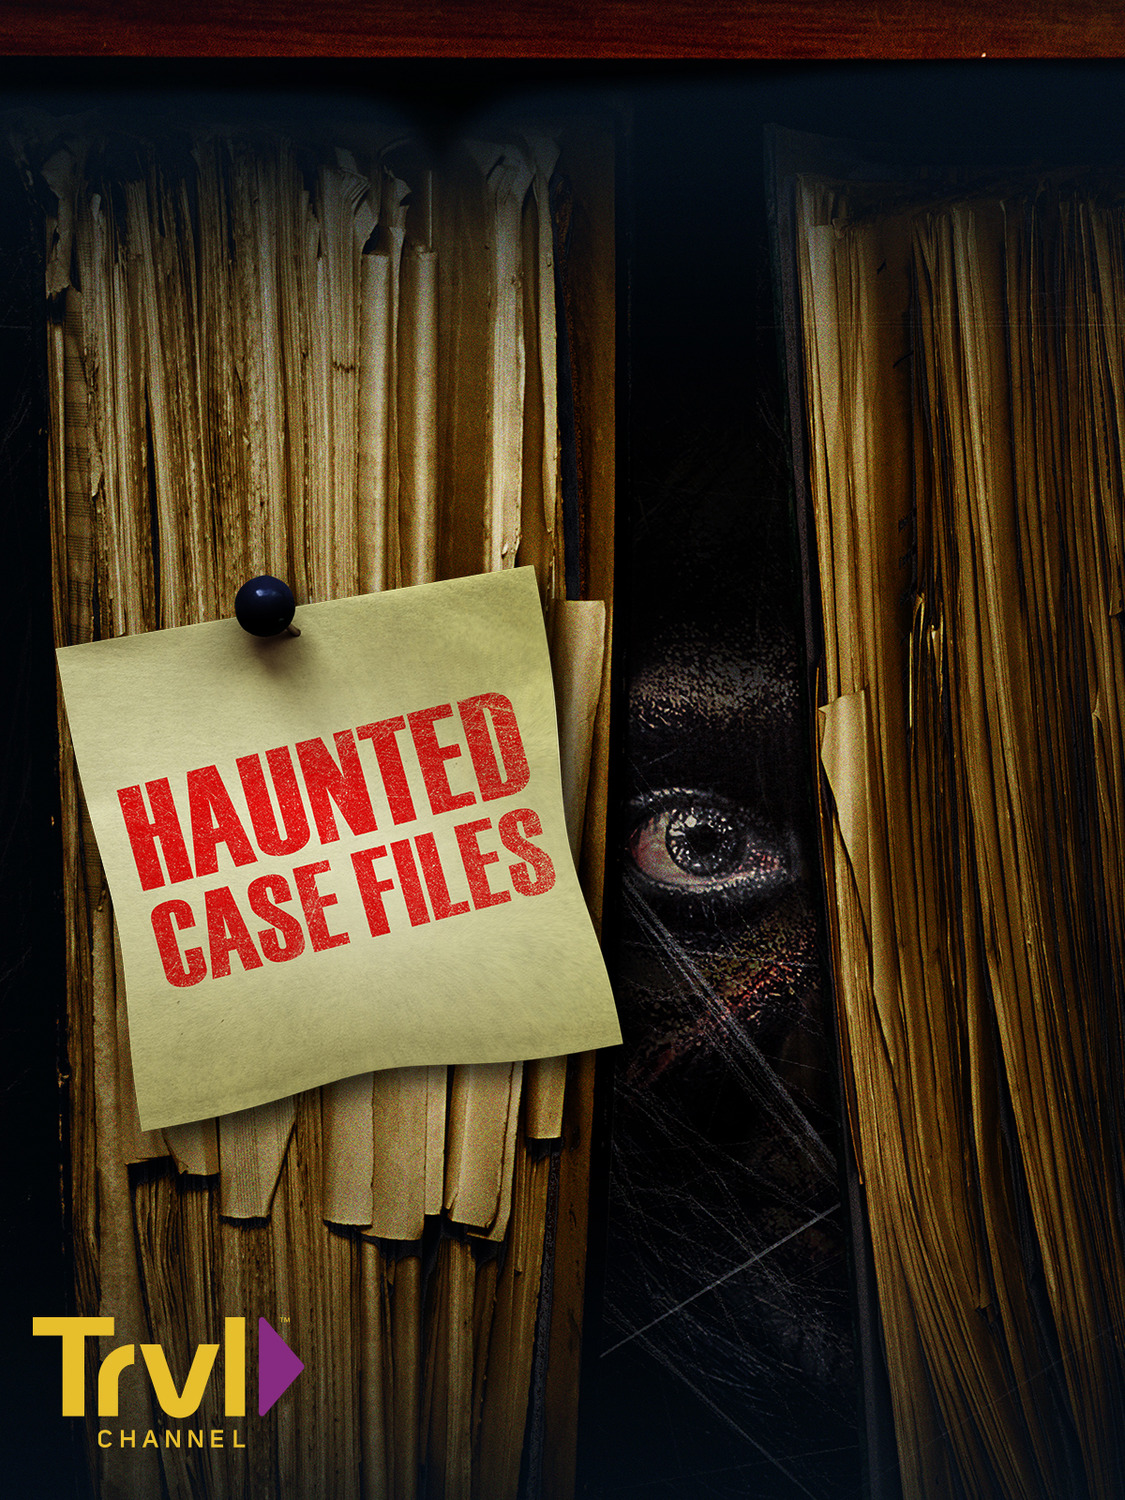 Extra Large TV Poster Image for Haunted Case Files 